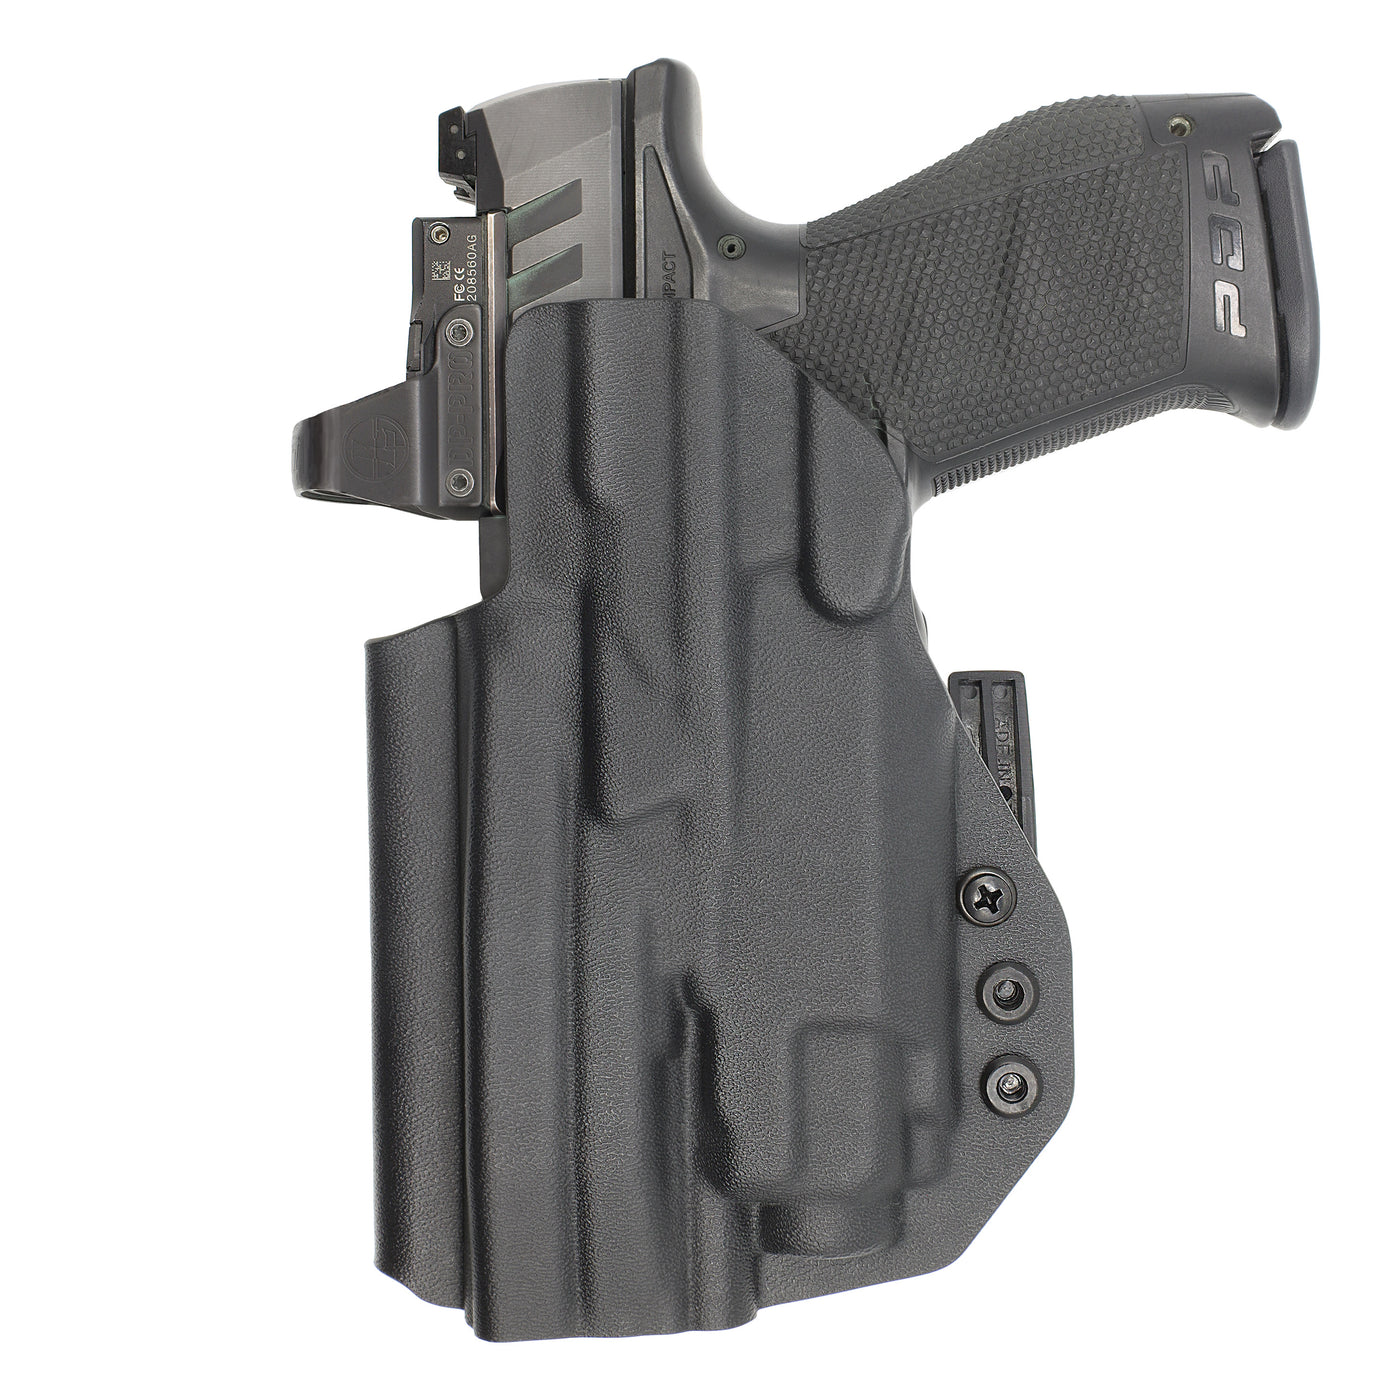 C&G Holsters custom IWB ALPHA UPGRADE tactical FN 509 streamlight TLR8 holstered back view